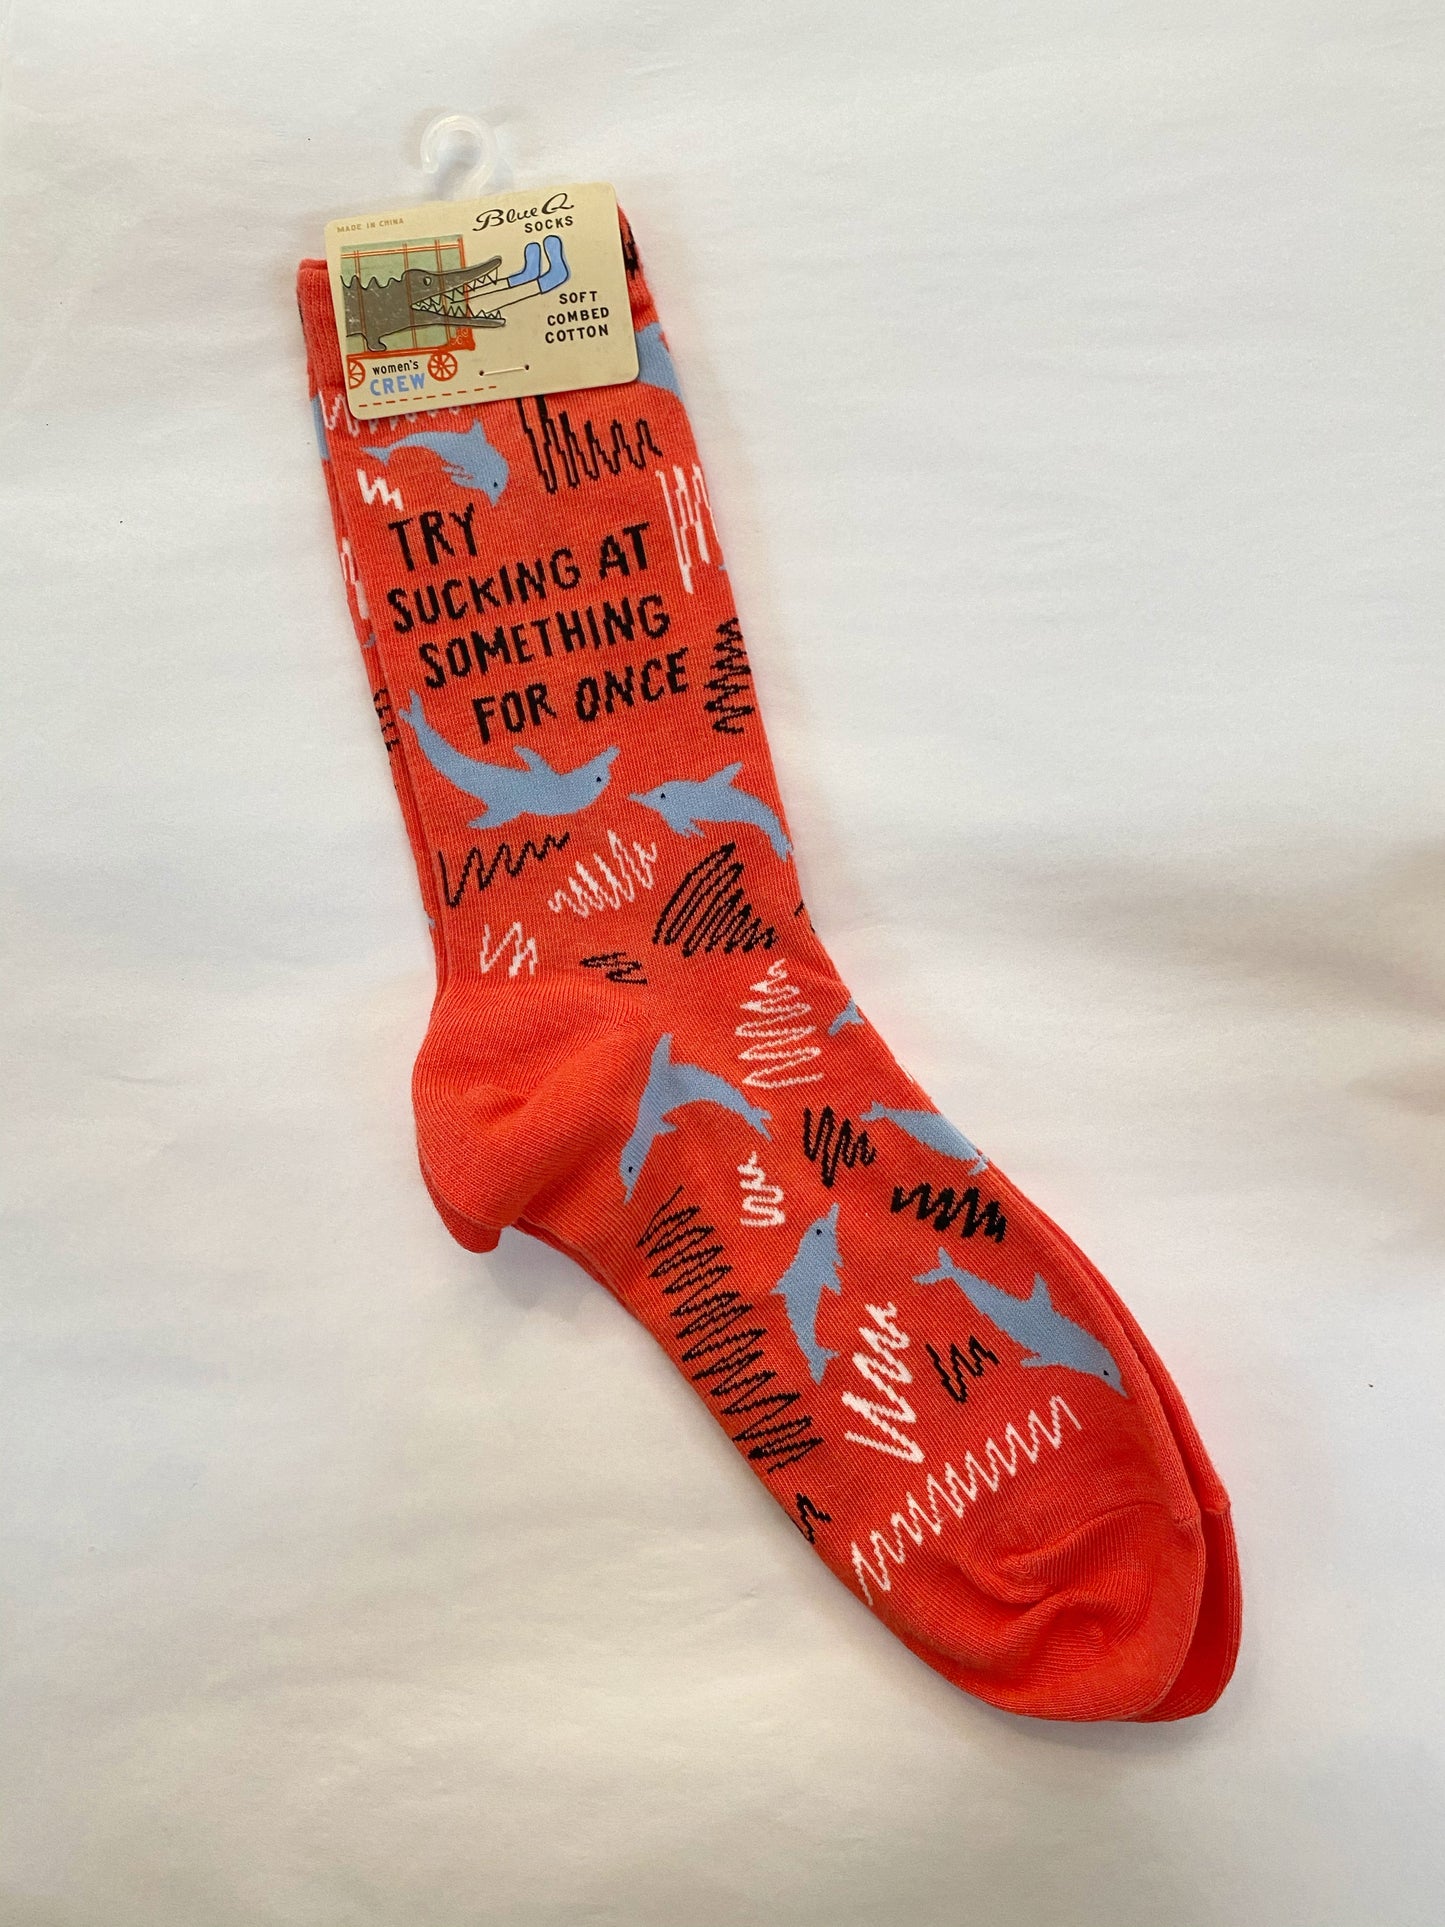 Try Sucking at Something for Once Women's Socks by Blue Q